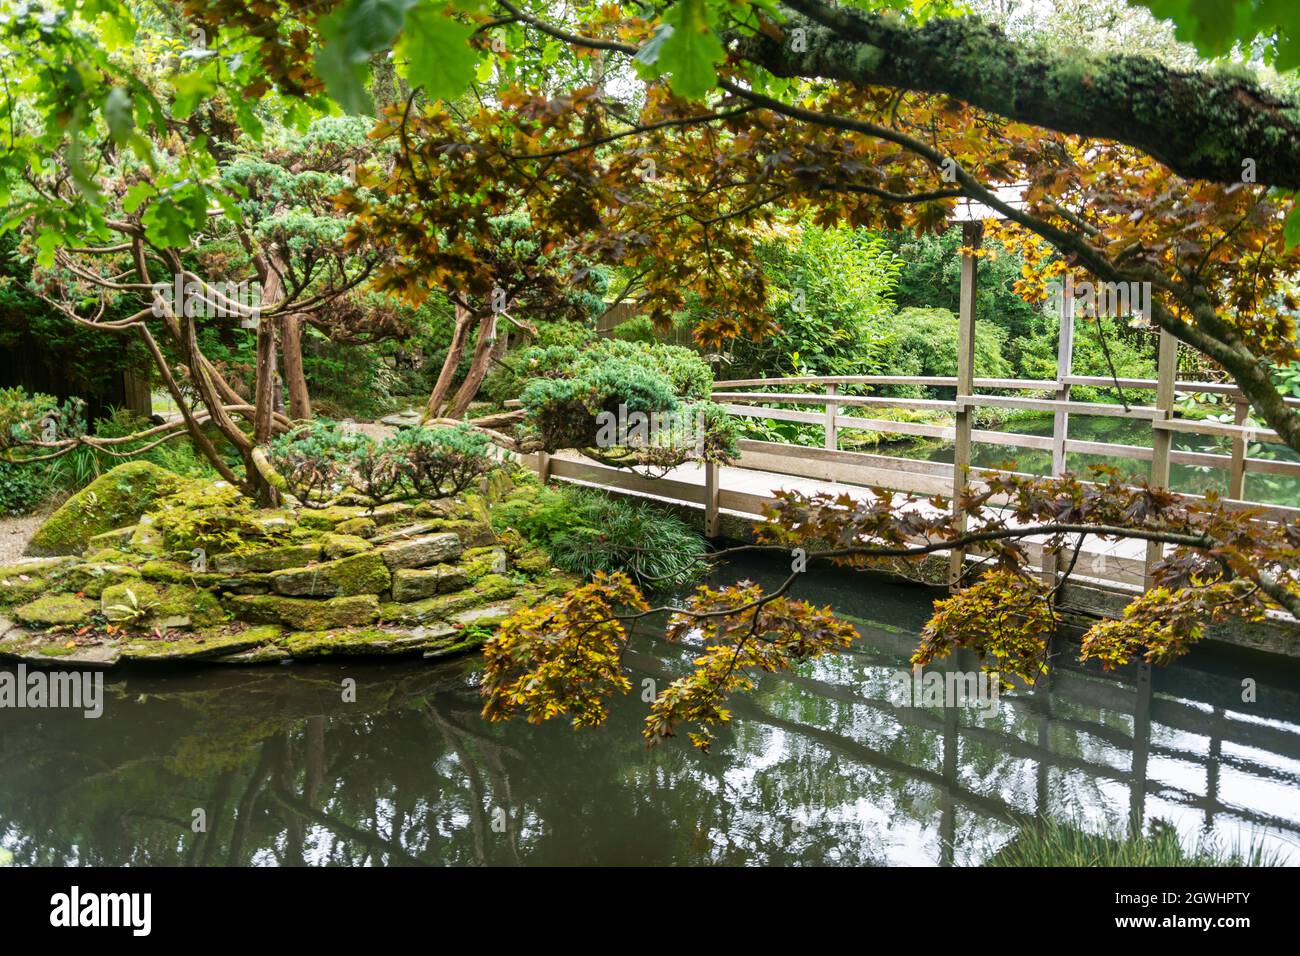 A view of a Japanese garden looking towards a bridge which traverses a pond which contains carp fish Stock Photo